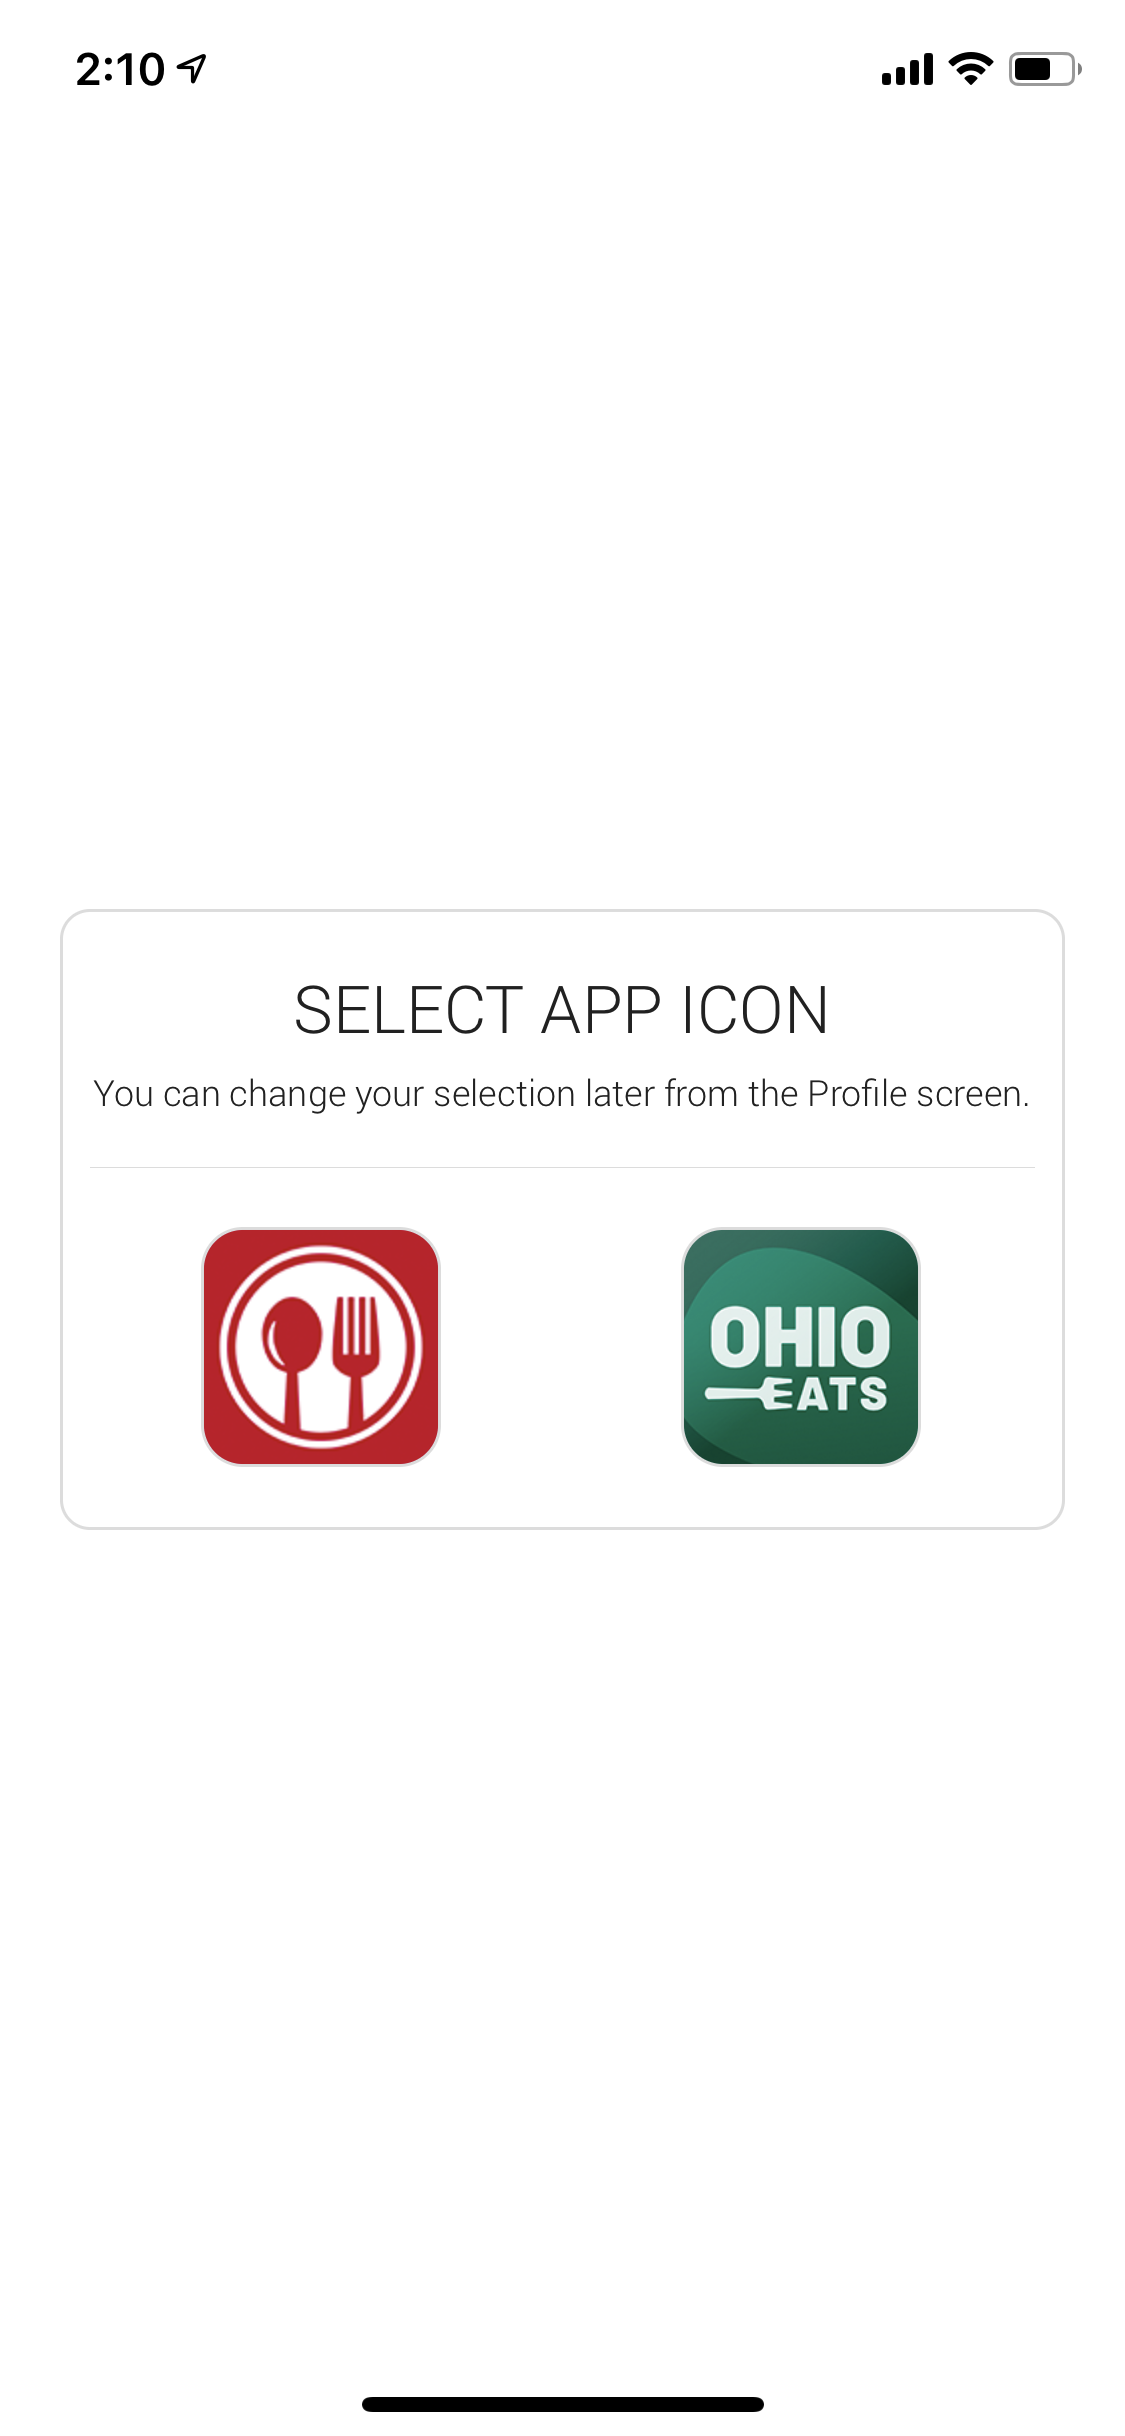 OHIO EATS app screen 2: decide which app art you prefer on your home screen